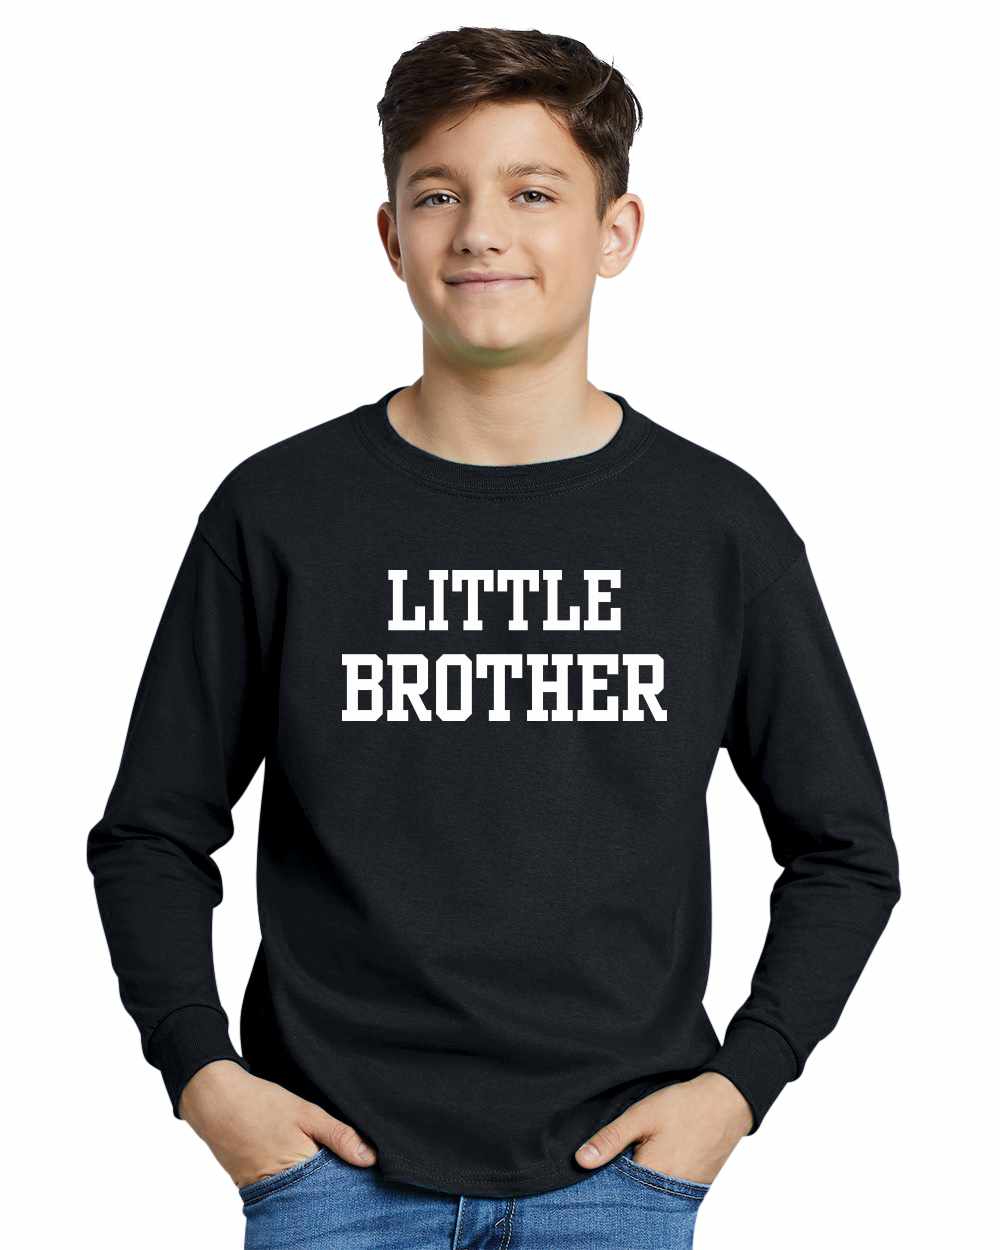 LITTLE BROTHER on Youth Long Sleeve Shirt